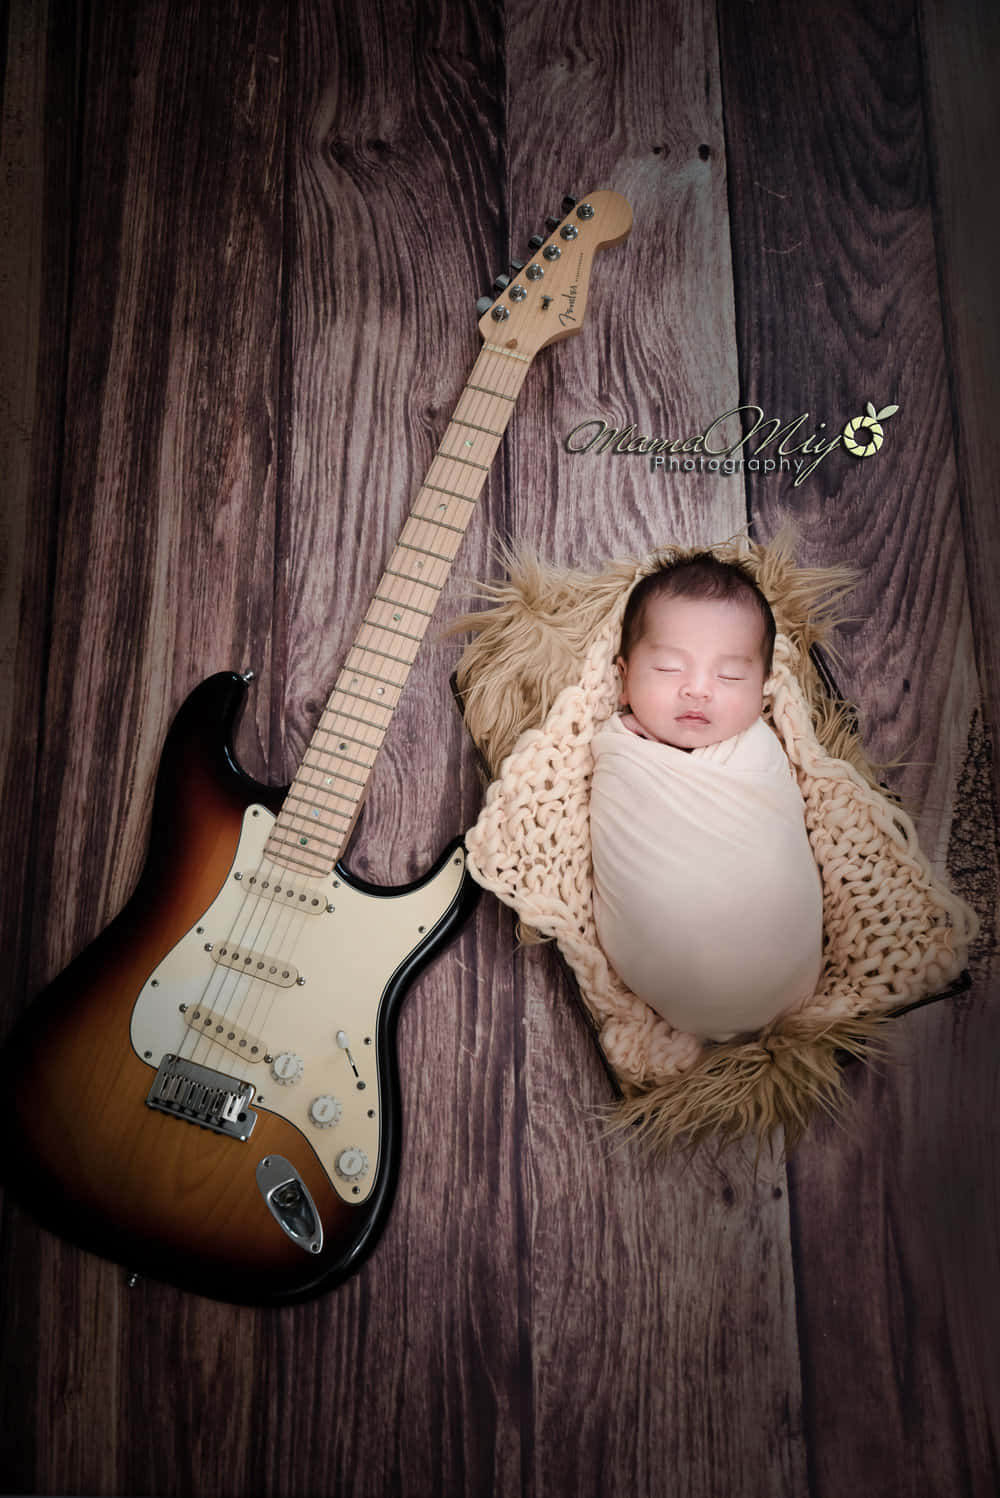 A Newborn Baby Is Laying Next To An Electric Guitar